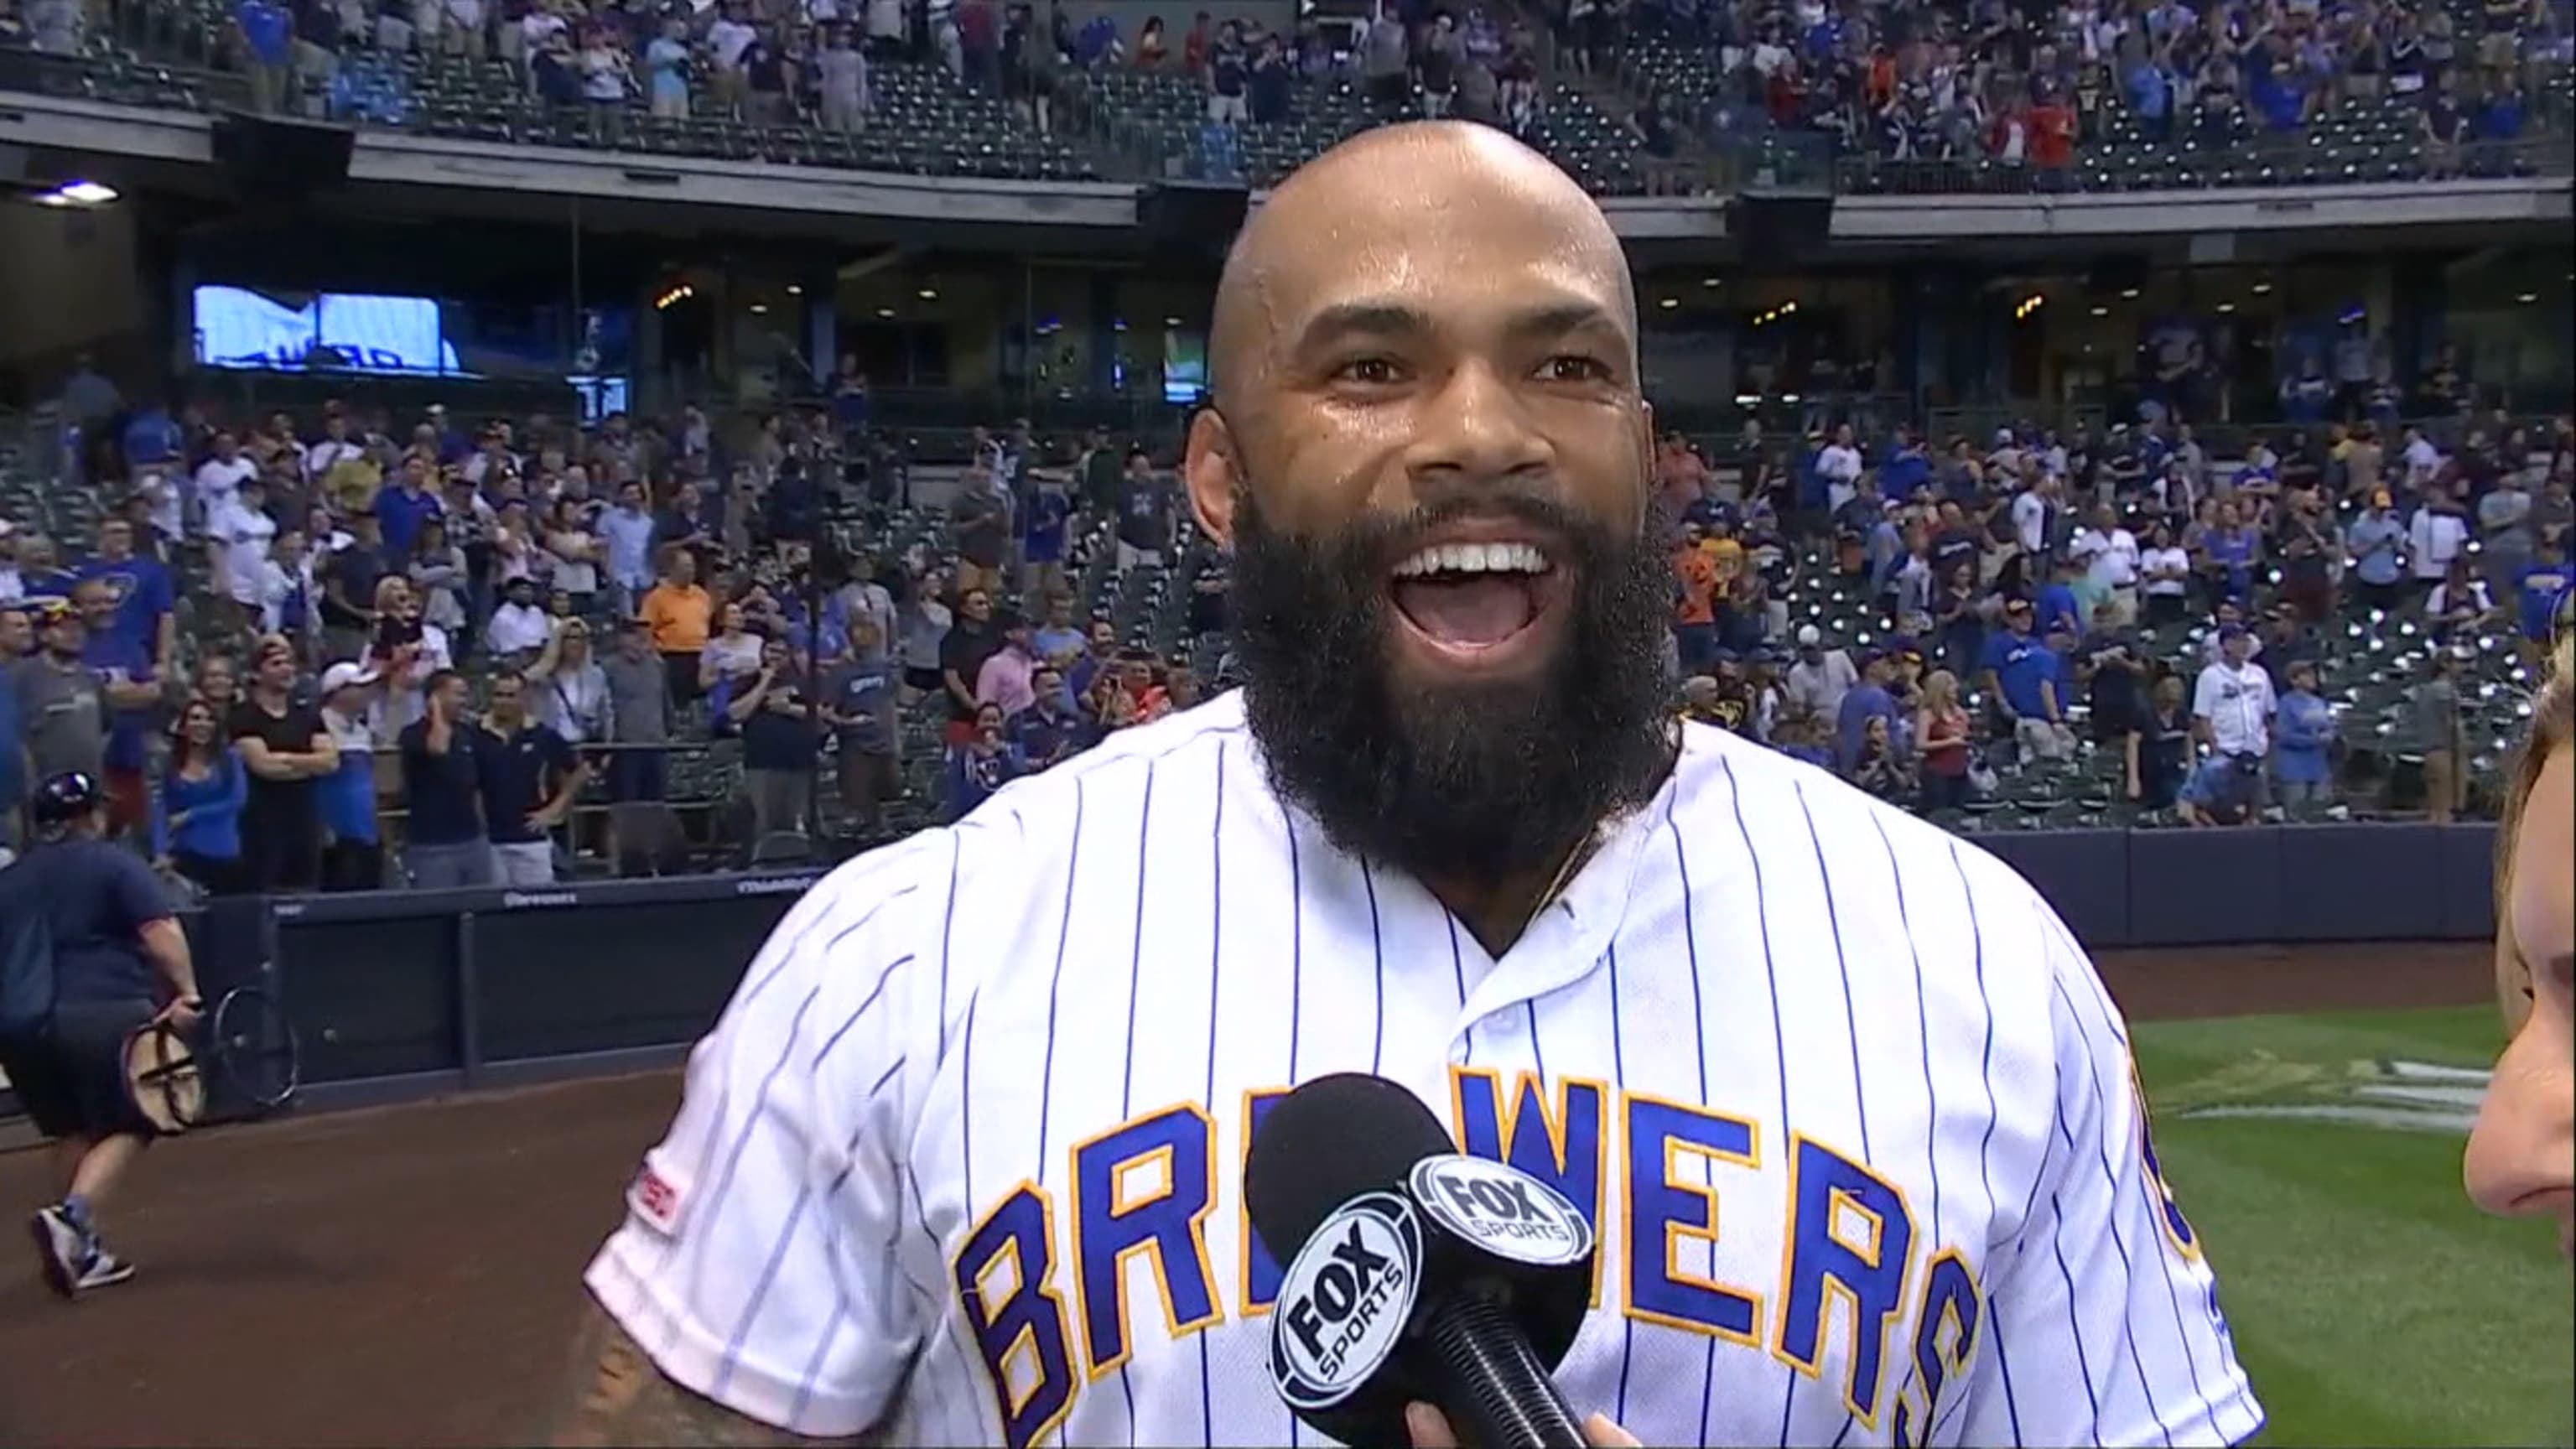 Eric Thames hit his career's 1st Walkoff homer which led to his jersey  being ripped off during the celebration.